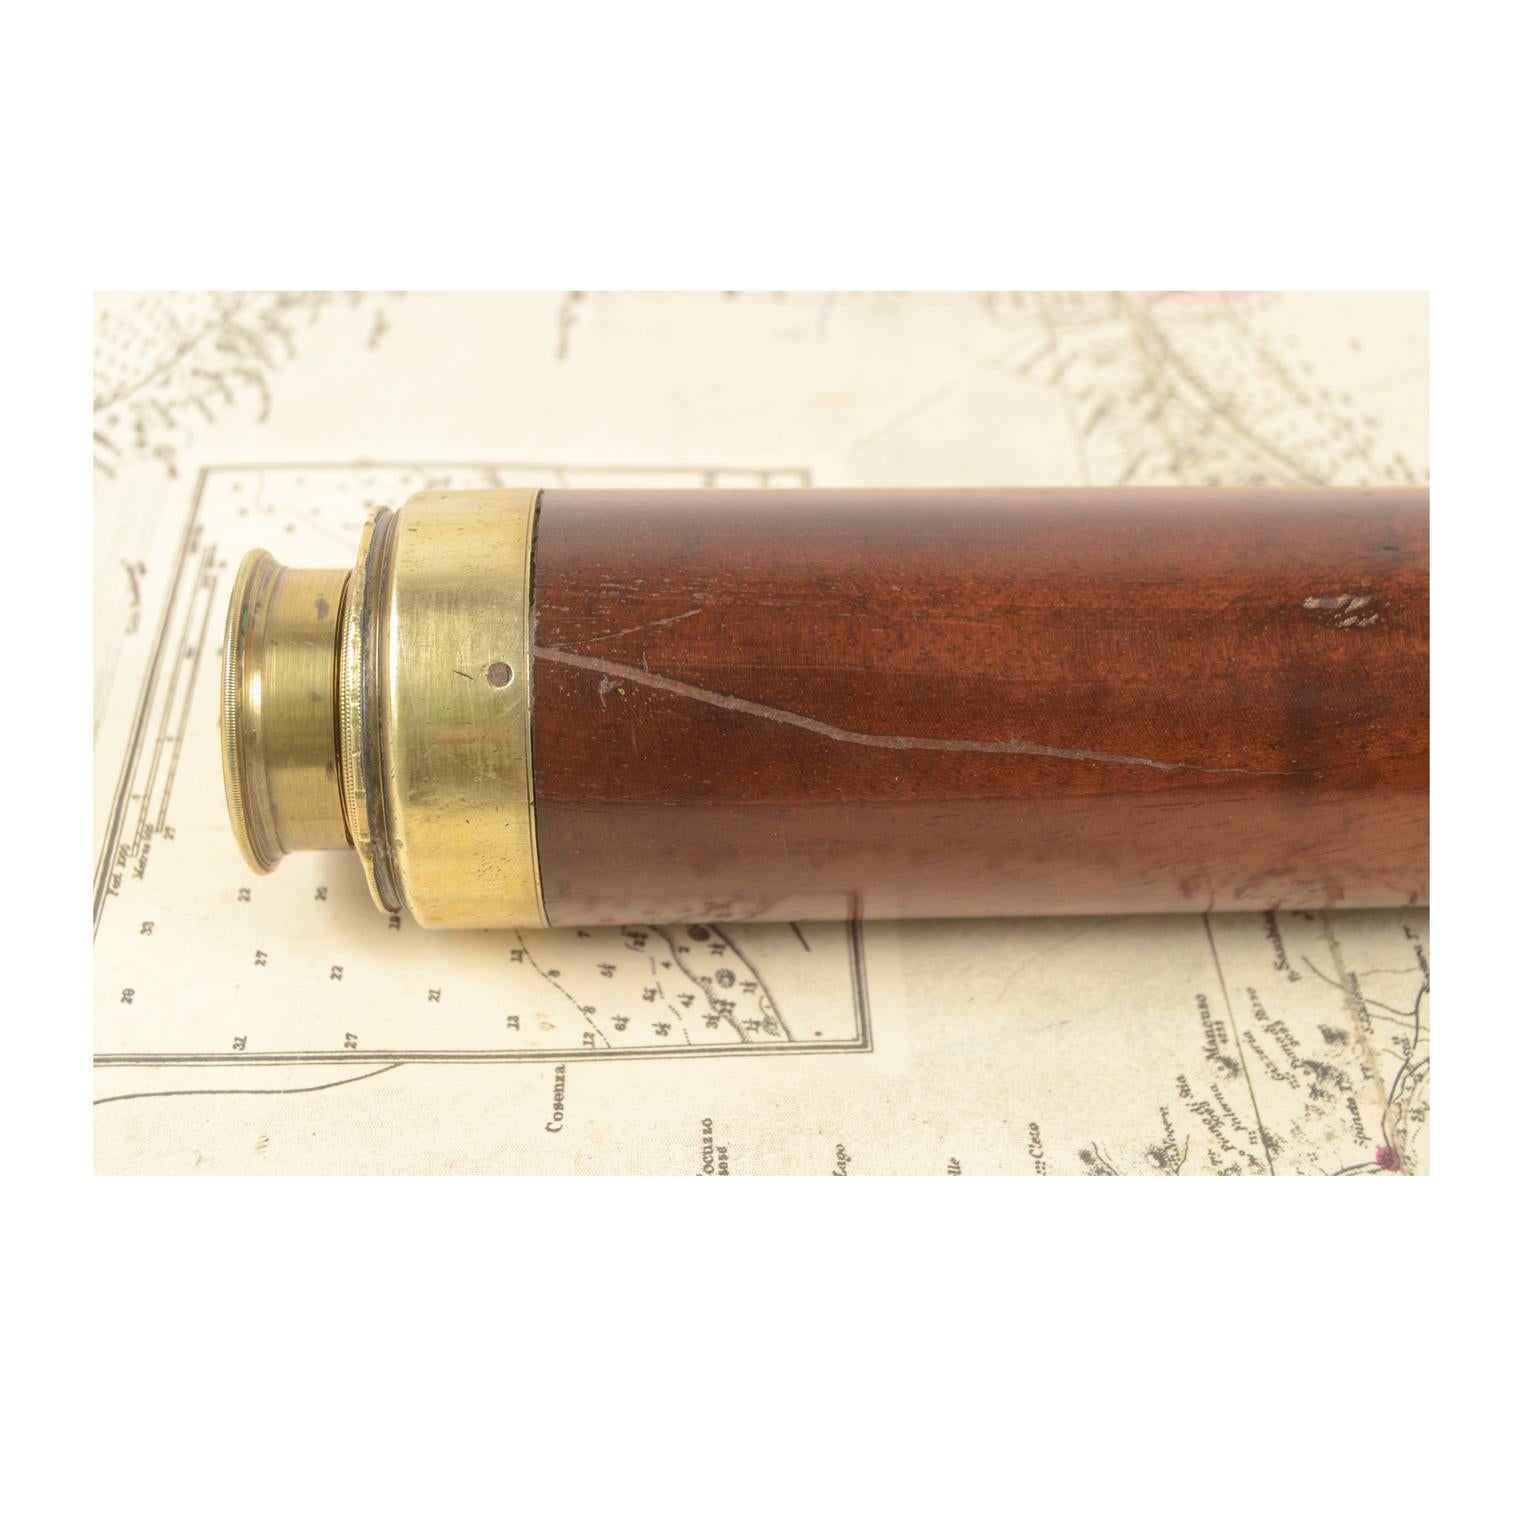 19th Century Antique Brass Telescope with Mahogany Handle English Manufacture 1